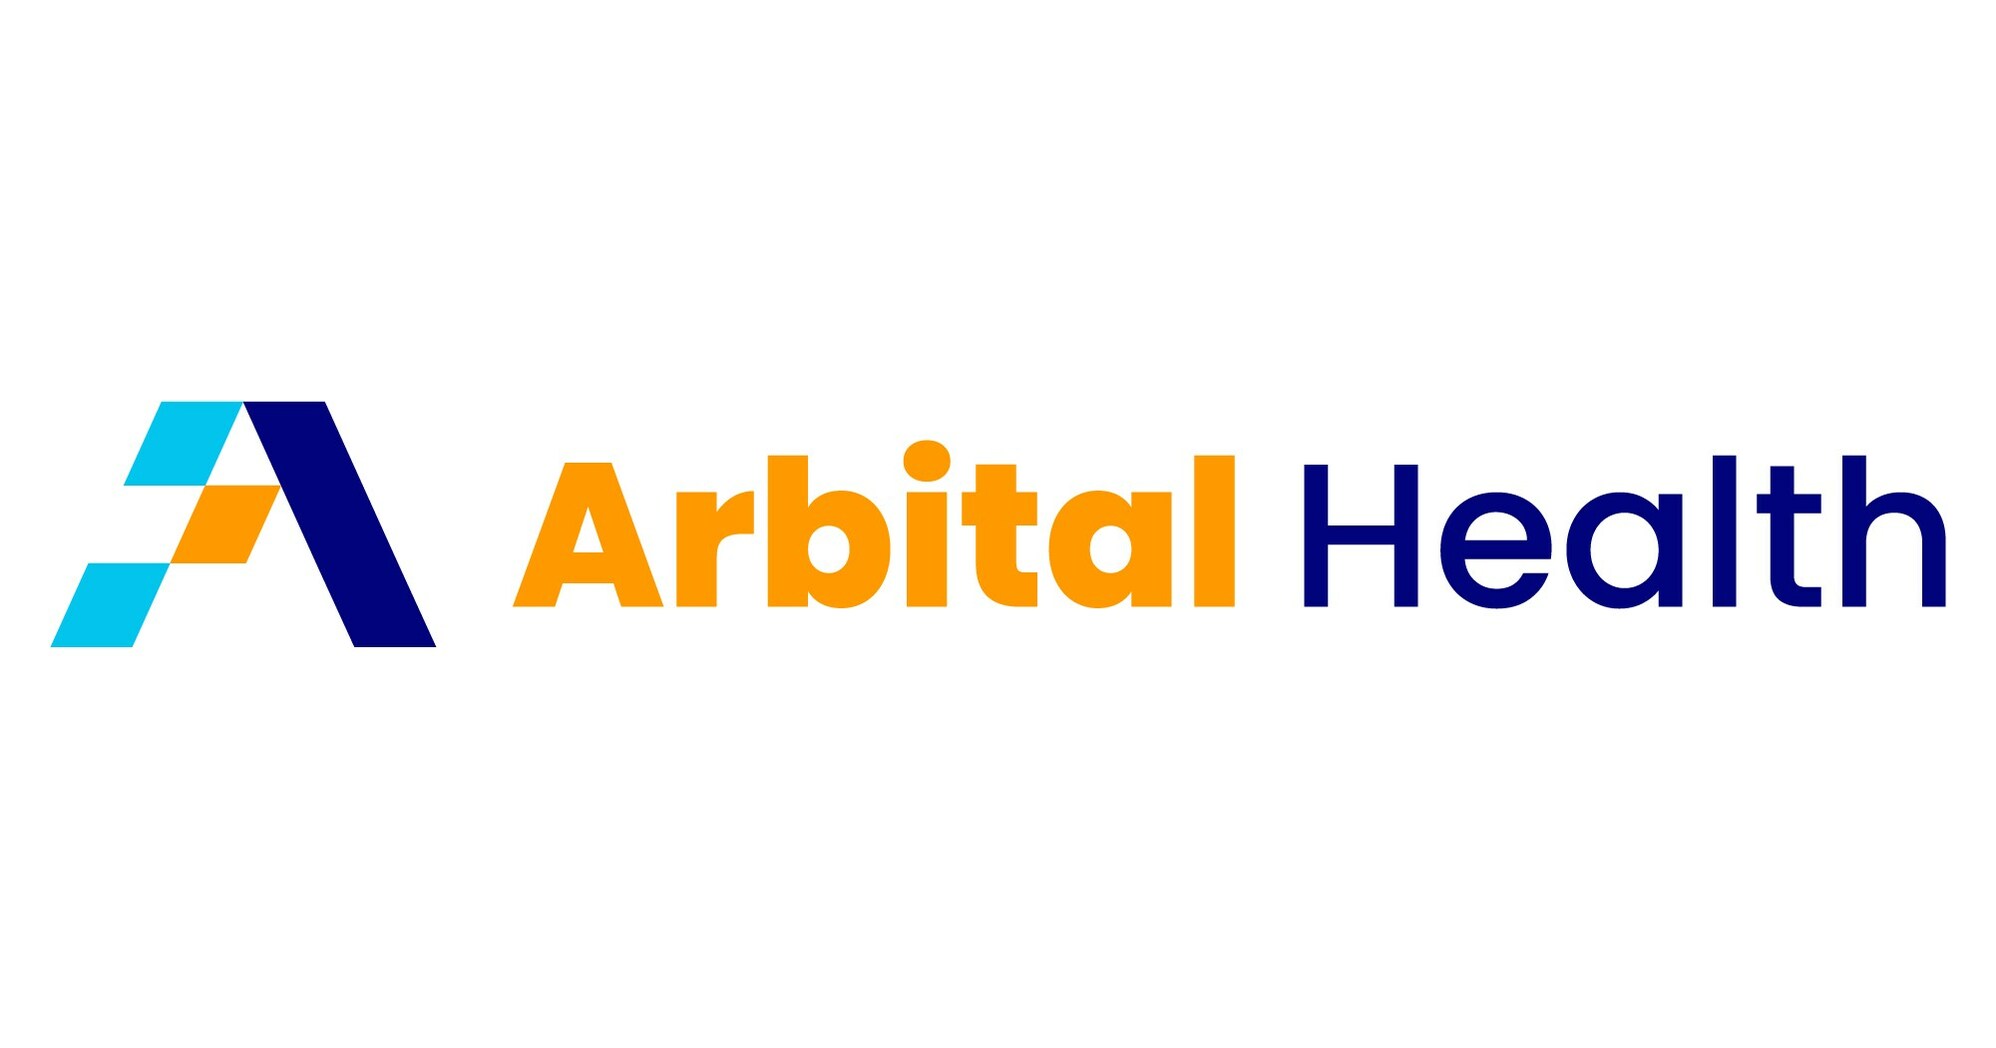 Arbital Health Acquires Actuarial Firm & Secures $10M for Value-Based Care Adjudication